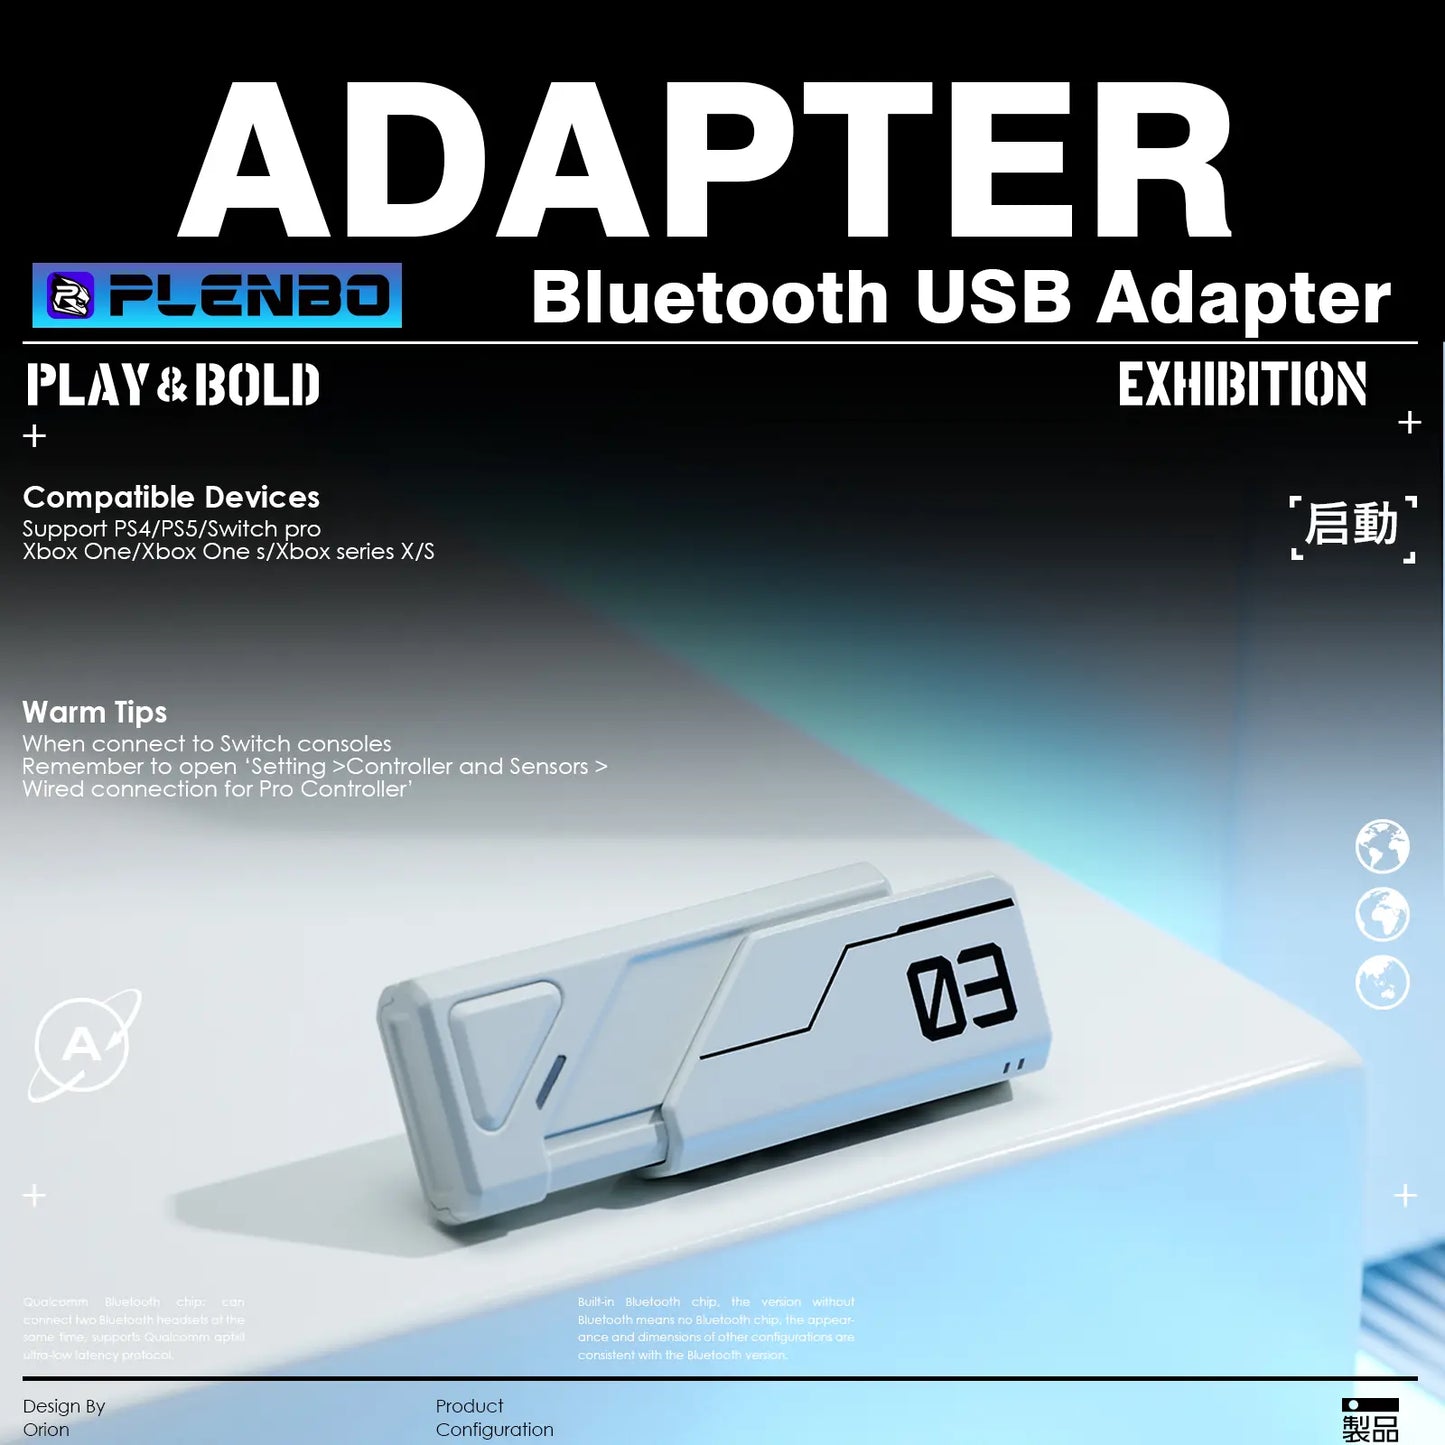 Bluetooth controller adapter's features